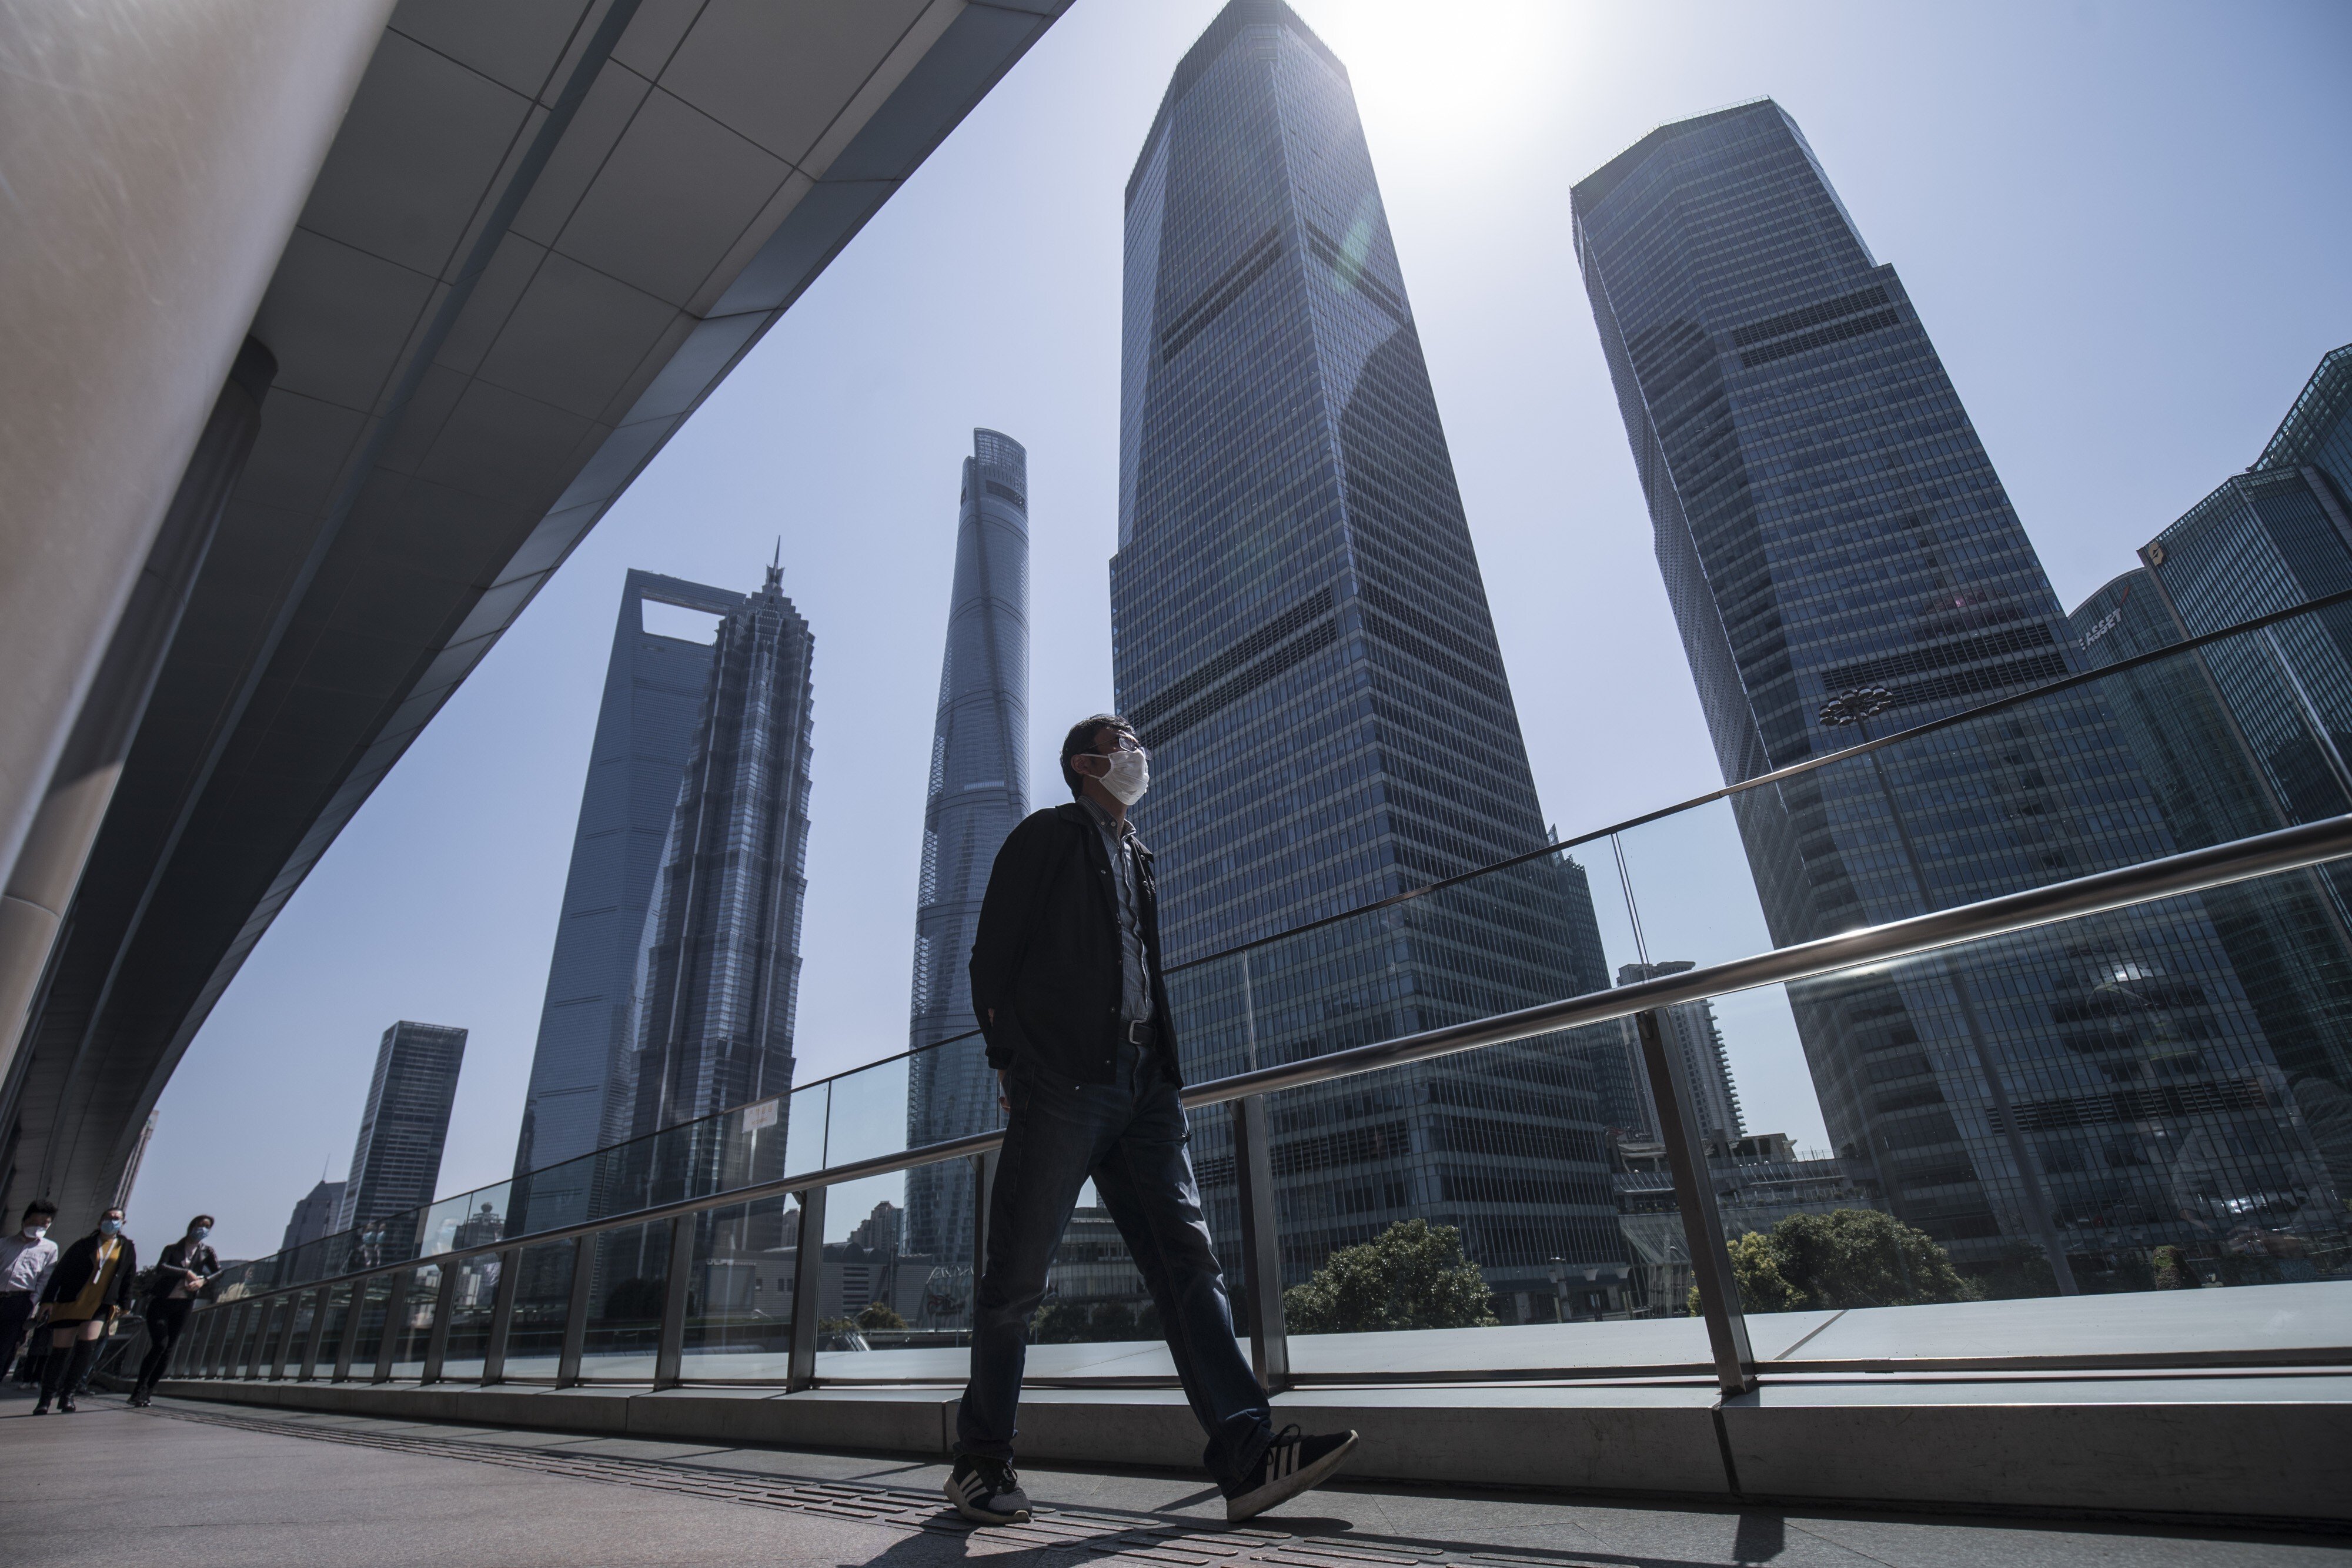 A man wearing a protective mask walks through the Lujiazui financial district in Shanghai. Most of China is now considered low-risk and should return to normal work and life, Premier Li Keqiang said. Photo: Bloomberg